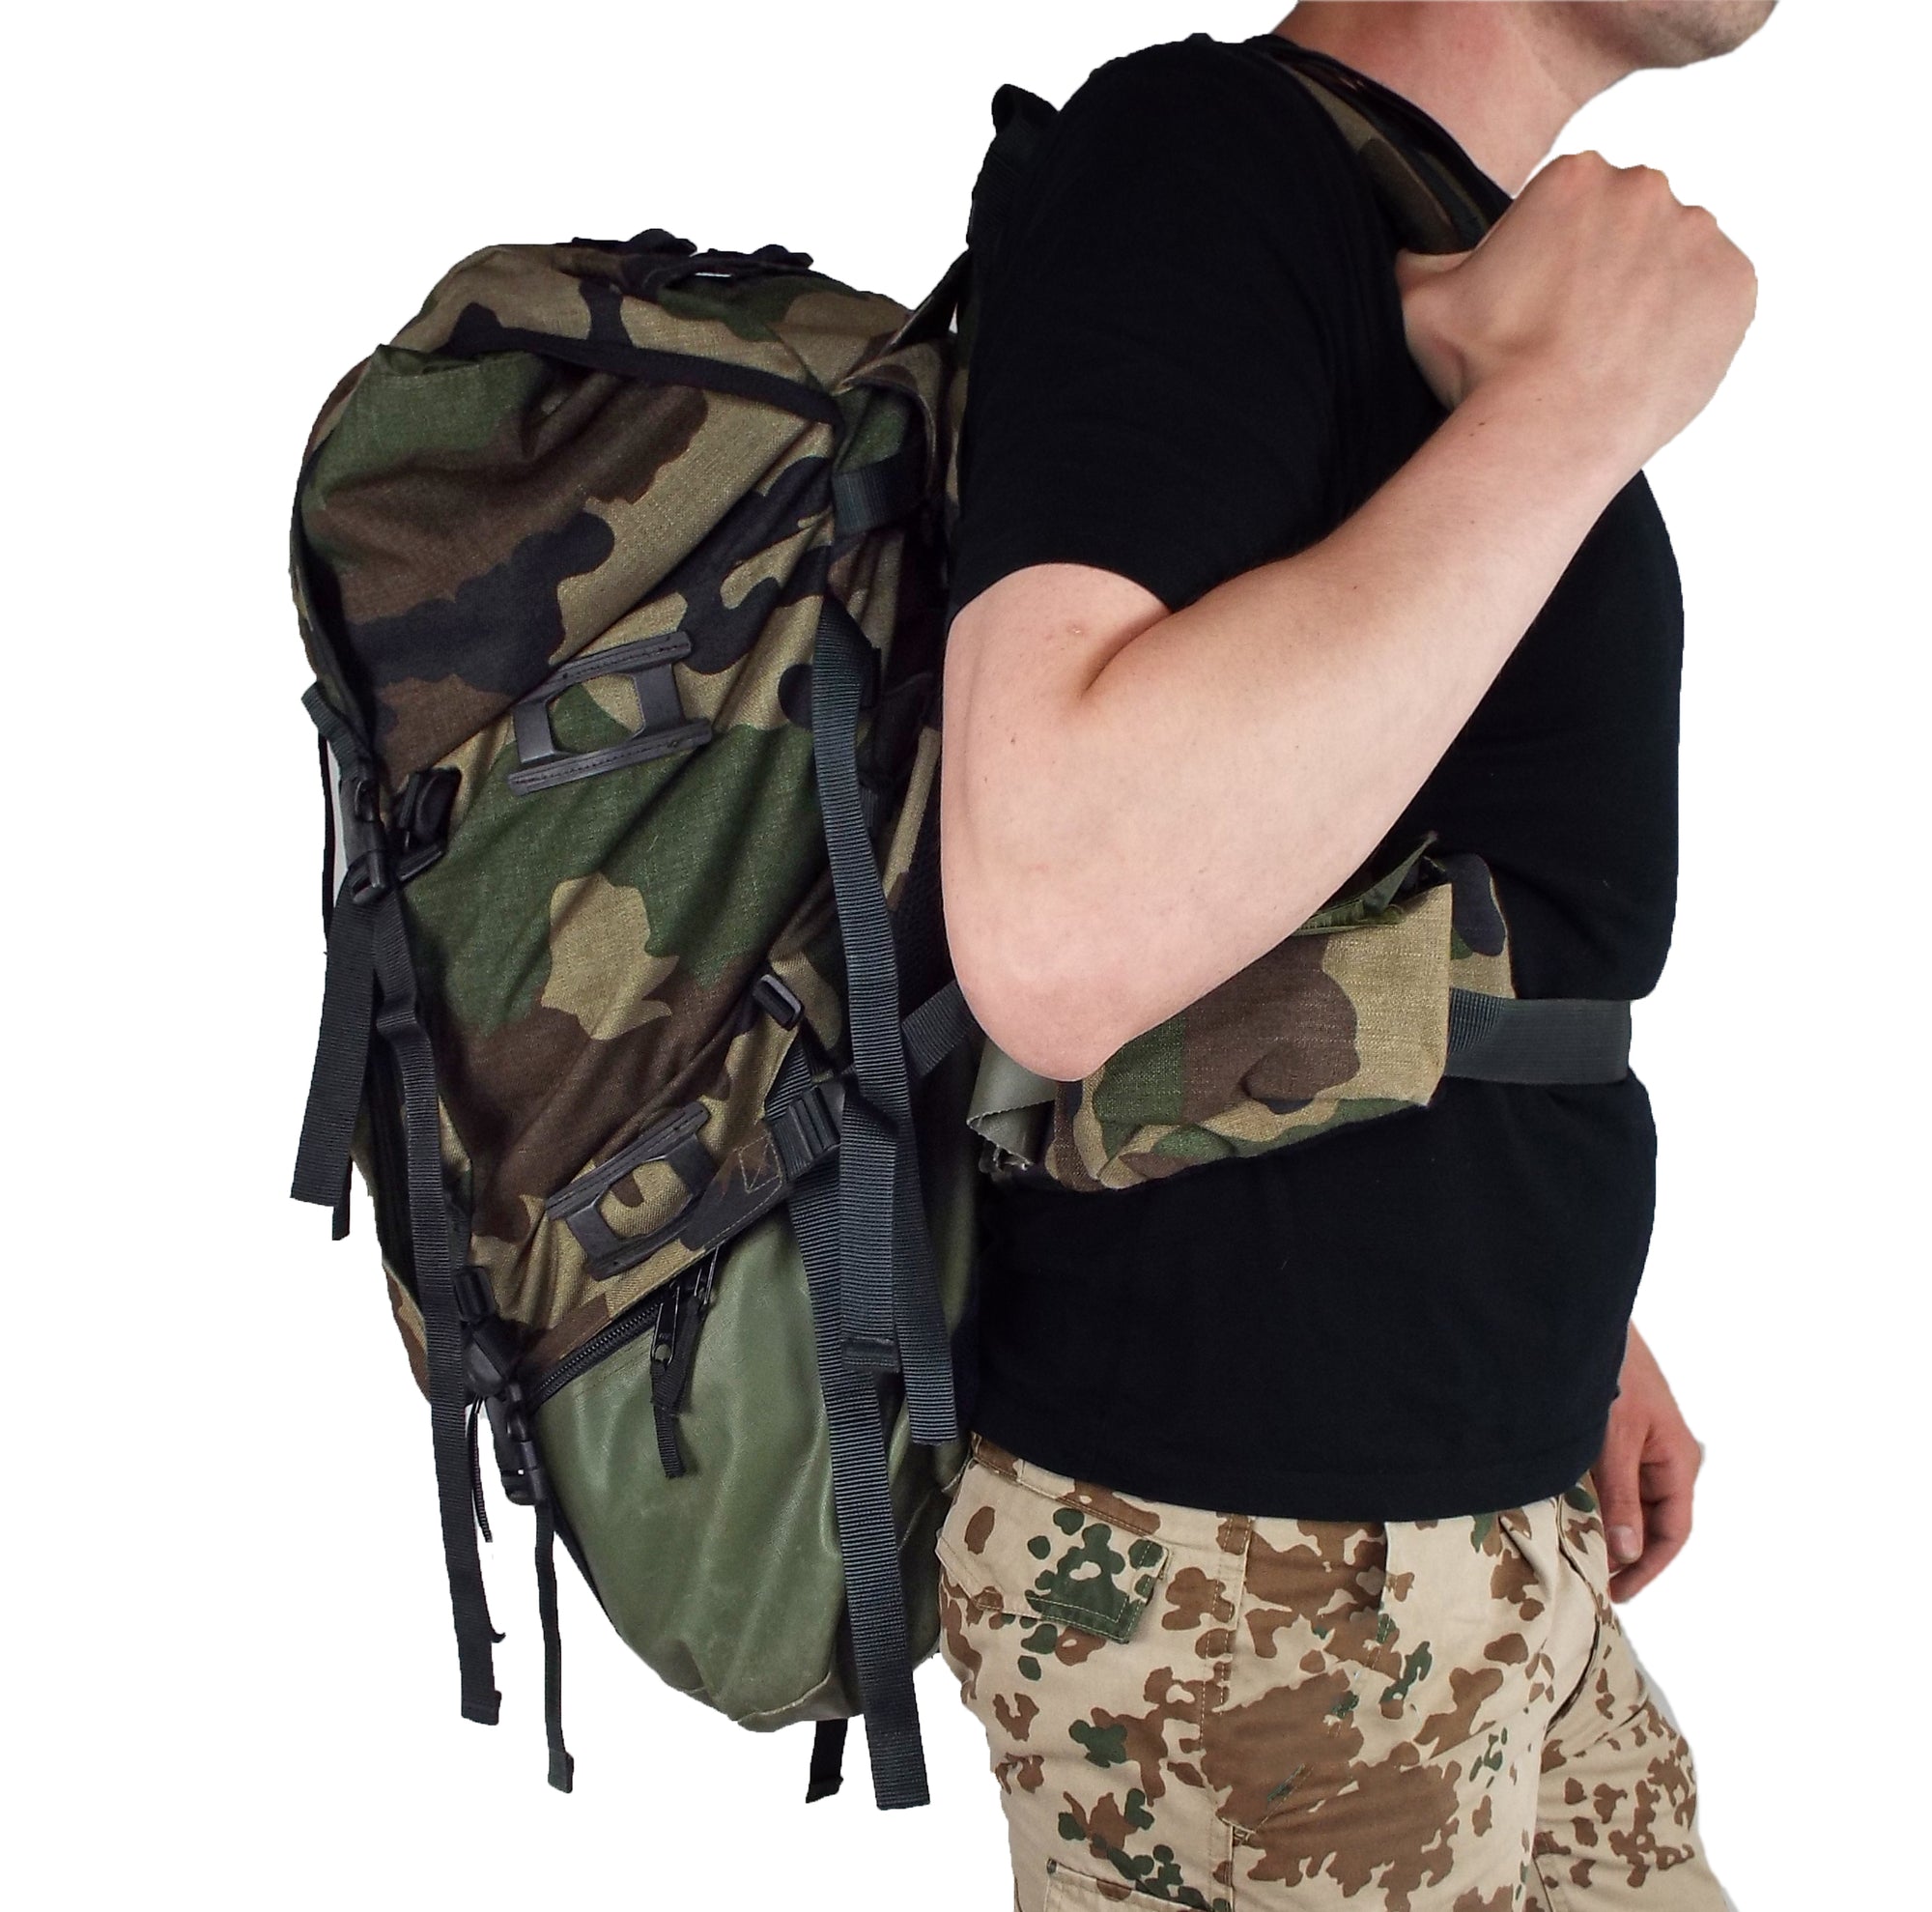 French Army - Woodland CCE - 100 Litre Rucksack - Grade 1